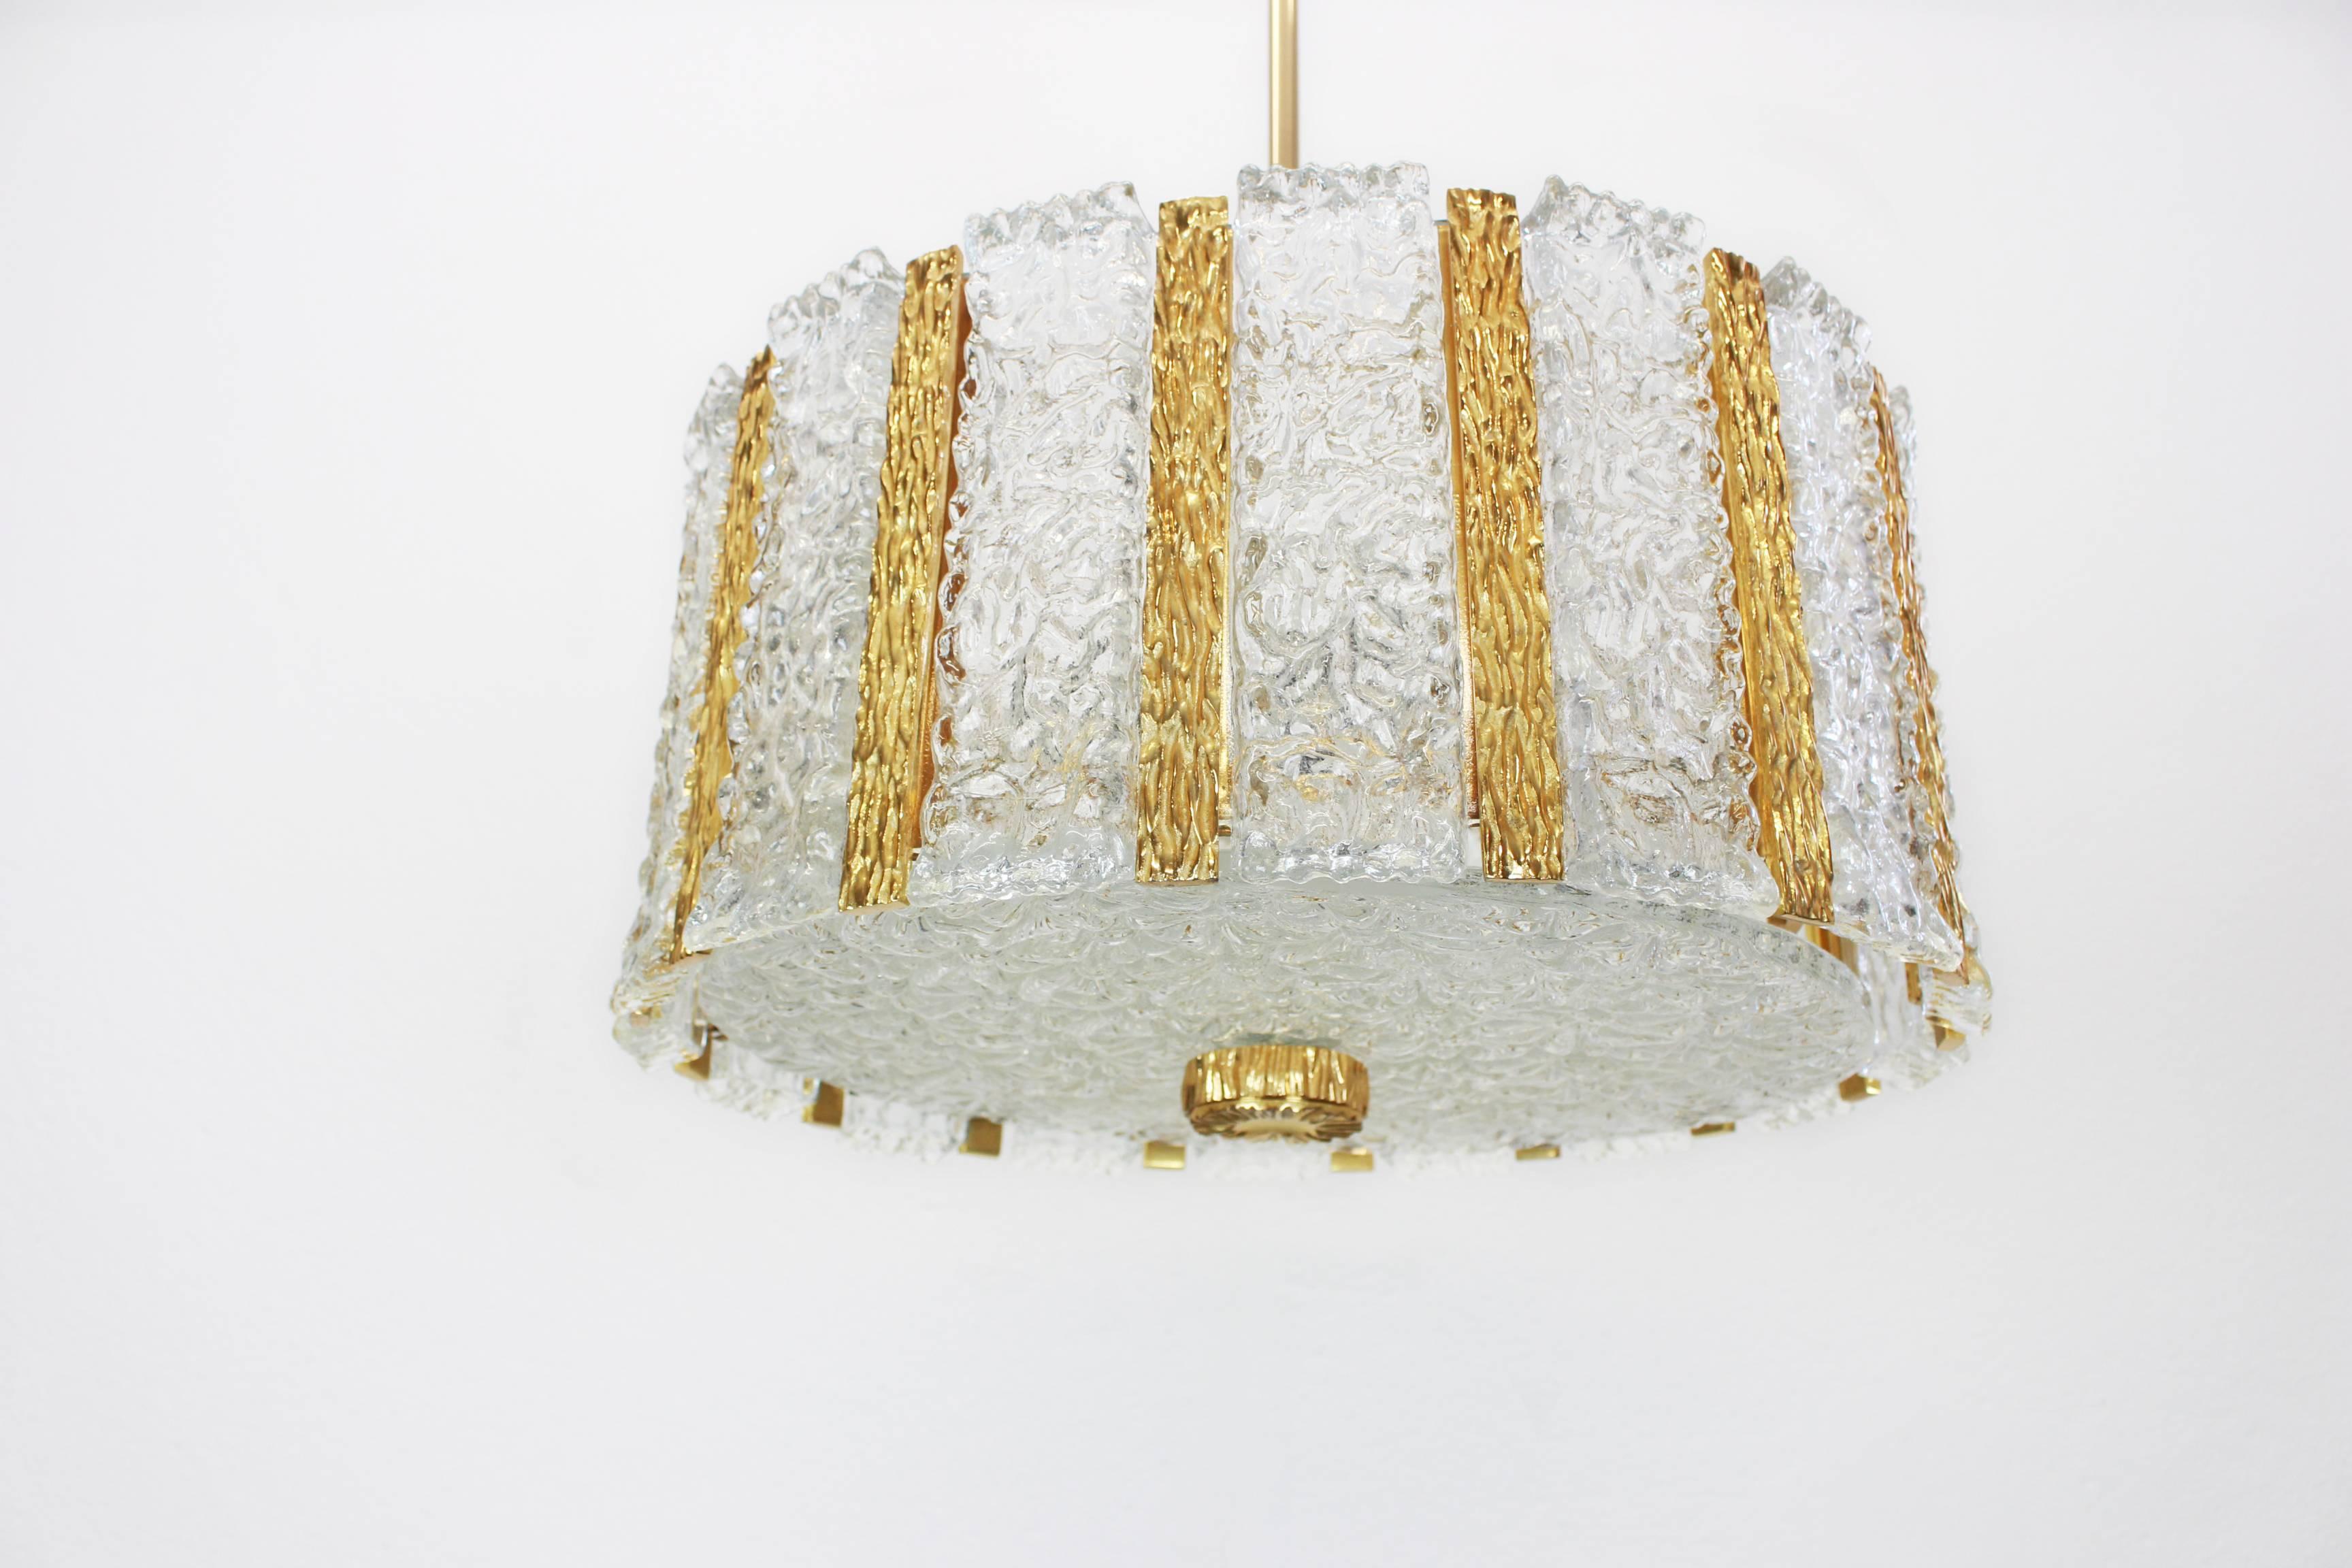 Gold-plated drum-shaped chandelier with 16 frosted glass panels on a gilt brass frame with a Brutalist inspired pattern. Best of design from the 1960s by J.T. Kalmar, Austria. 

High quality and in very good condition. Cleaned, well-wired and ready